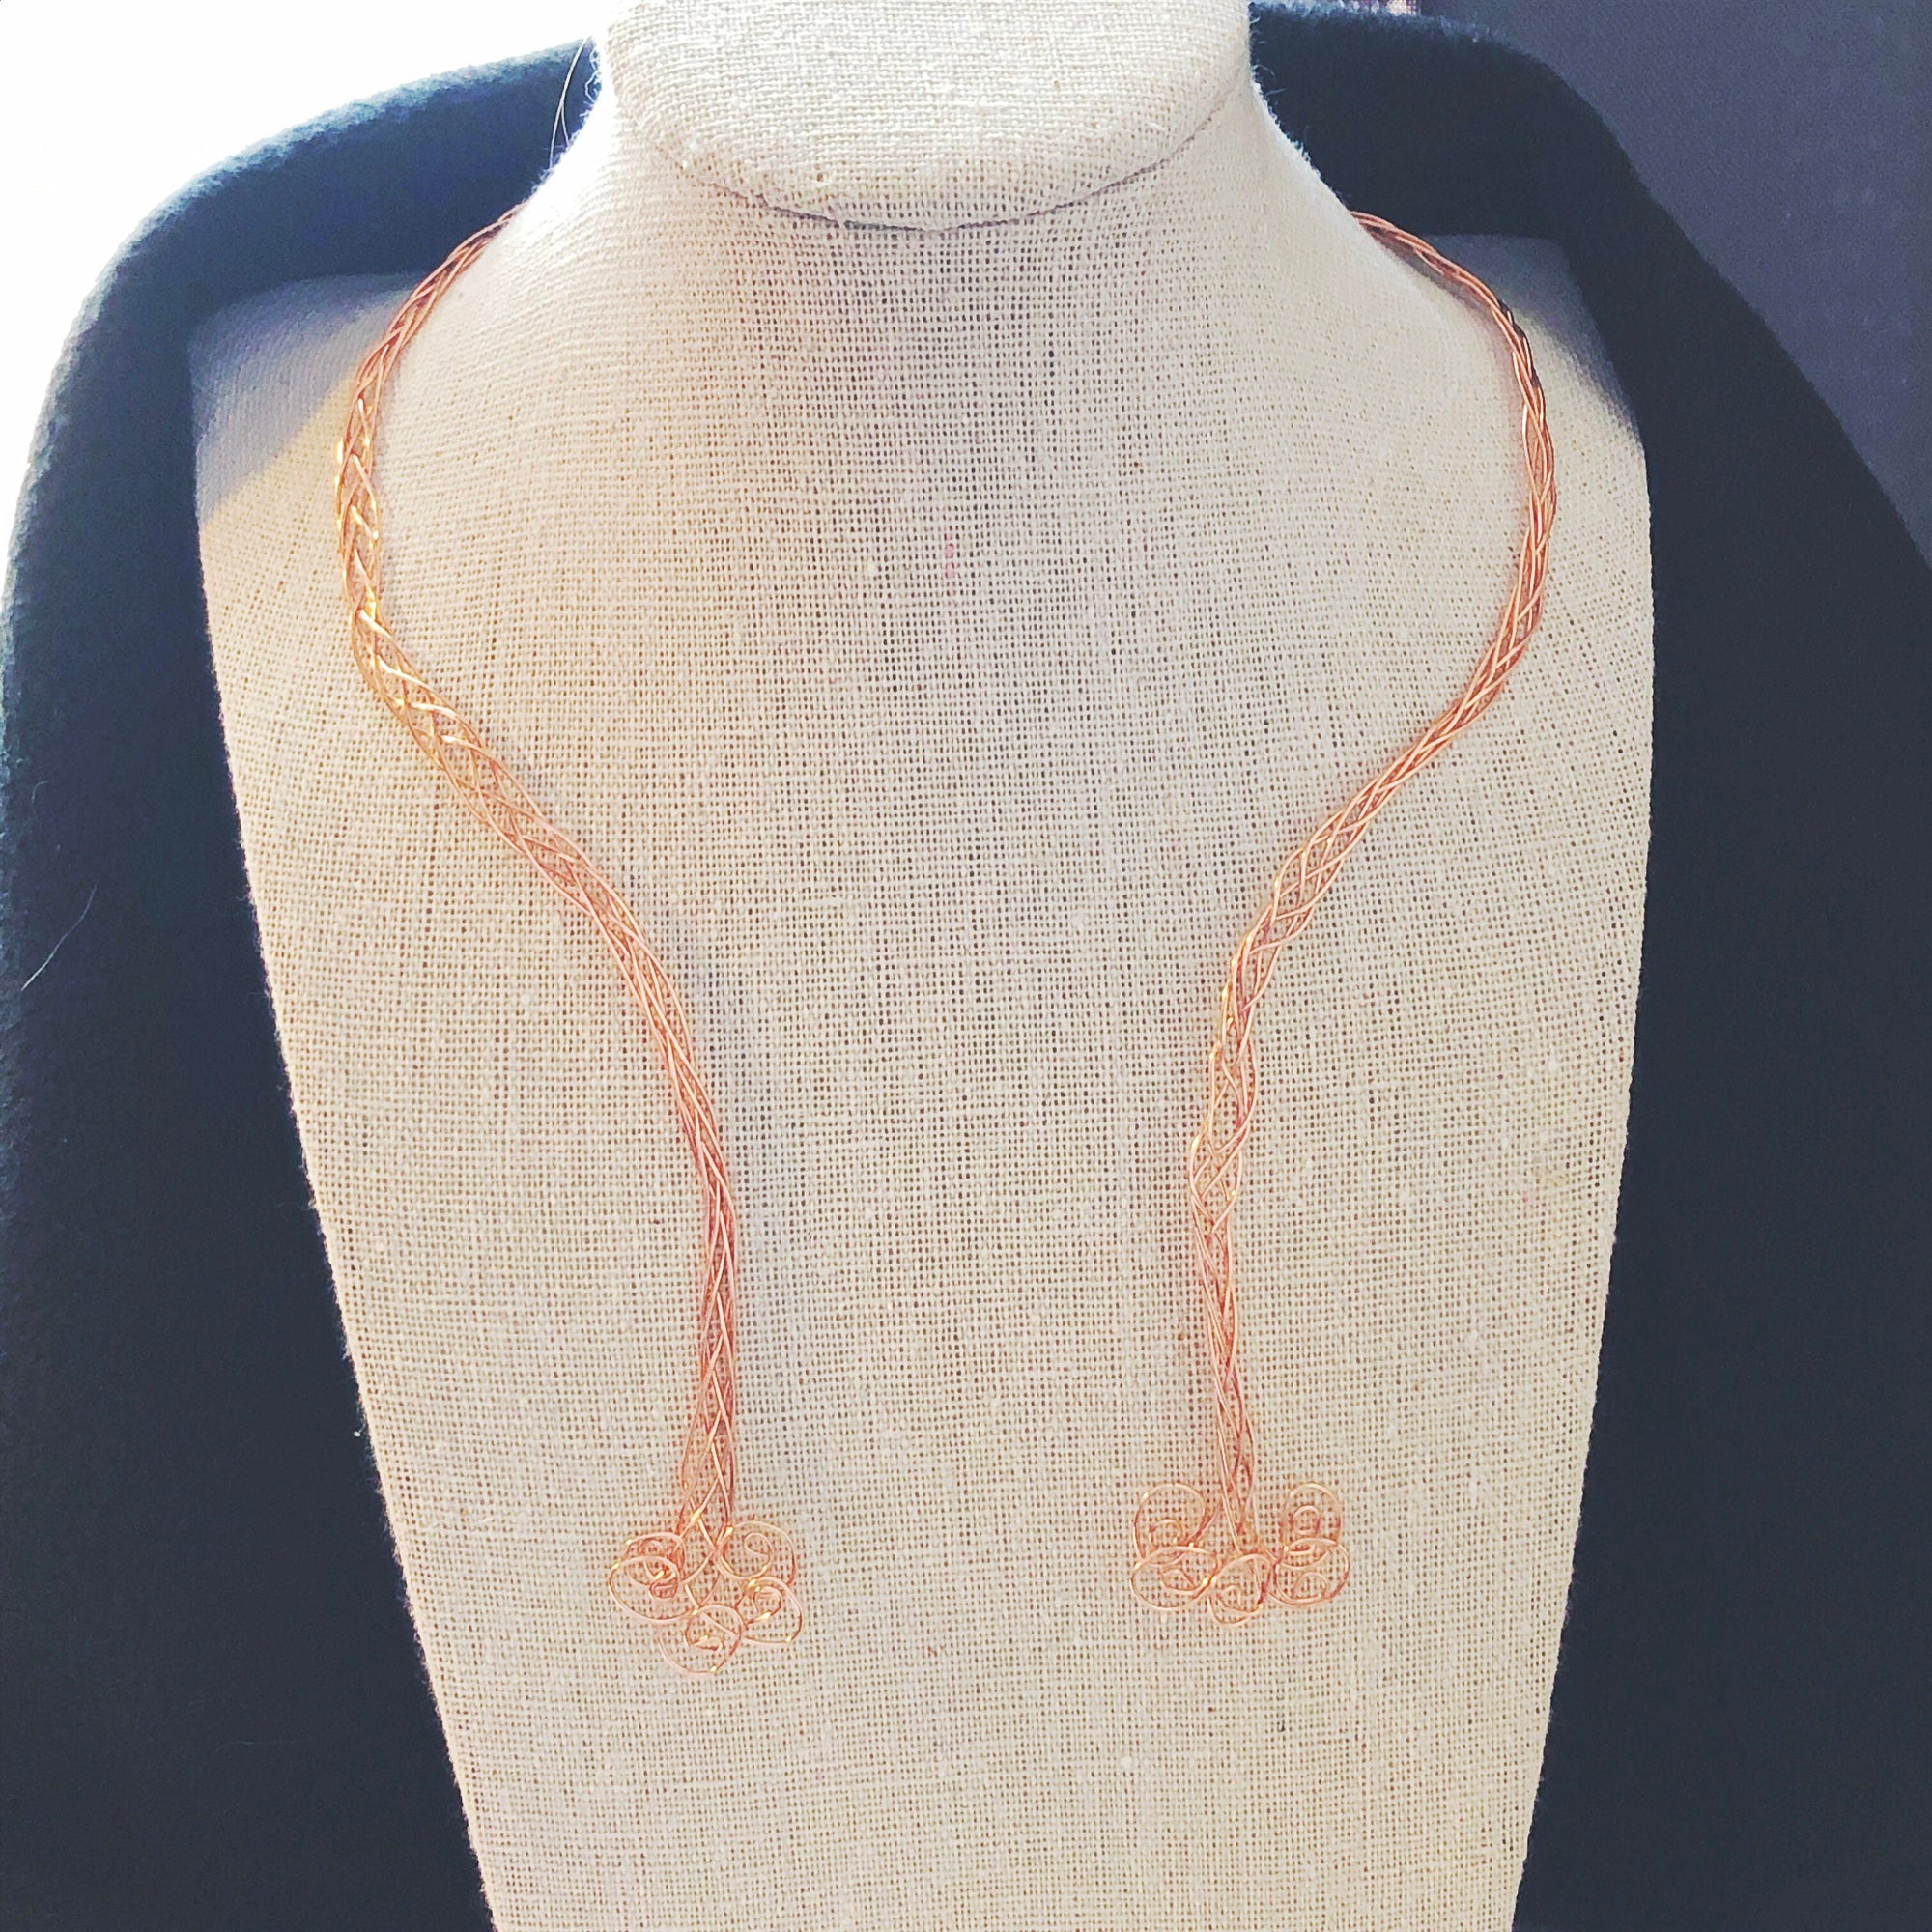 Copper Viking necklace, Celtic knot collar necklace, Norse jewelry Choker necklace for women, Copper woven necklace, Dainty Celtic jewelry